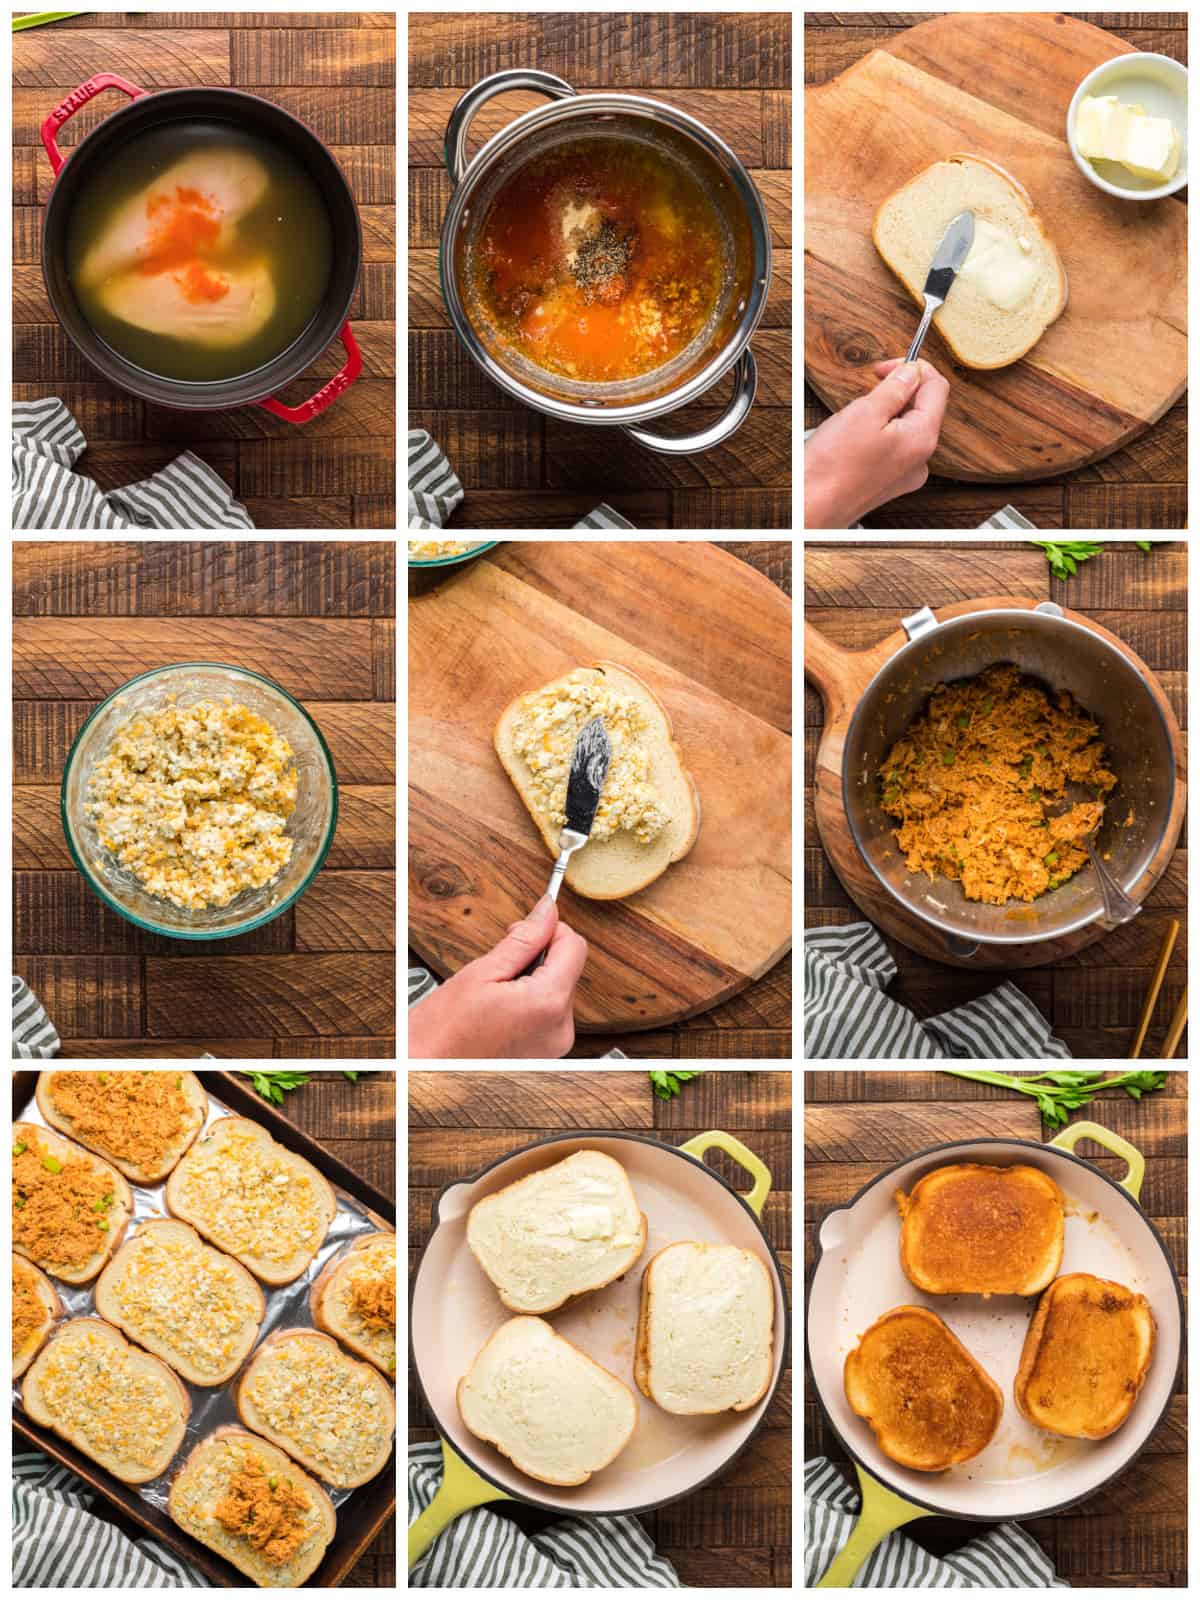 Step by step photos on how to make a Buffalo Chicken Grilled Cheese.